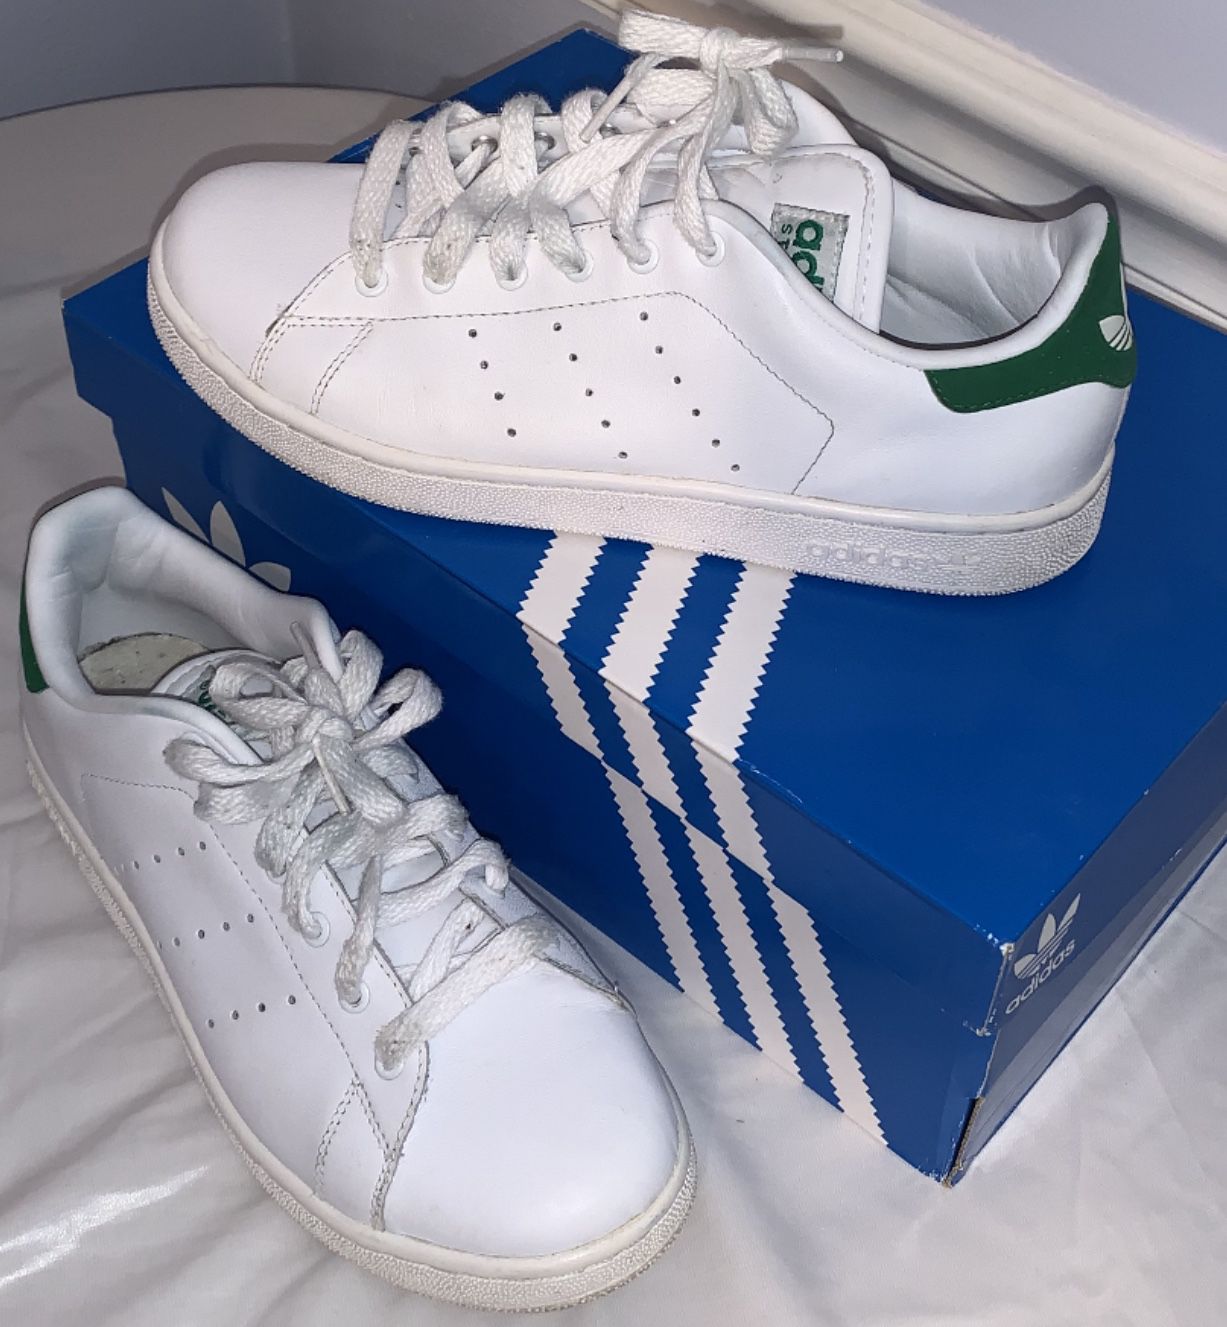 Adidas Women's Stan Smith Casual Sneakers White Green Size 6